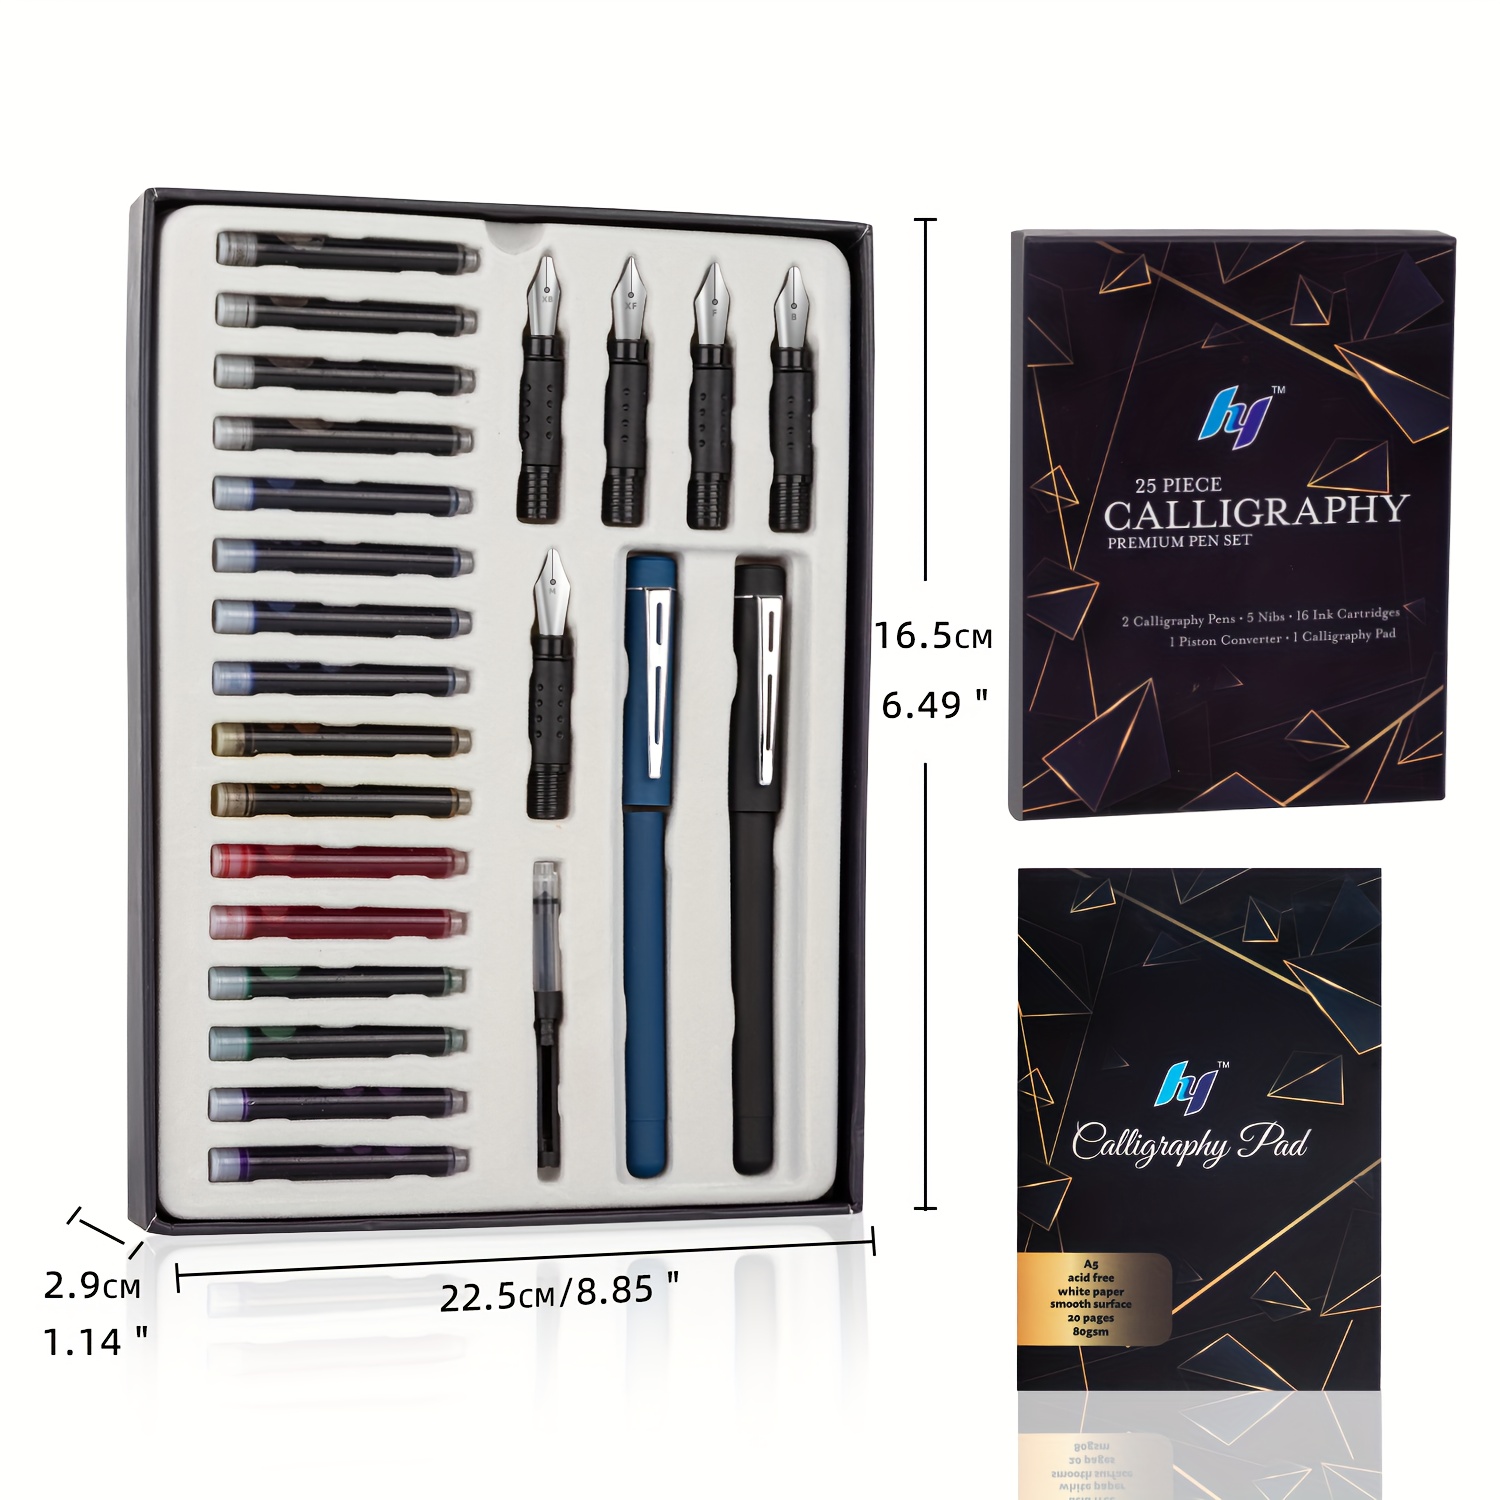 Calligraphy Pen Set, Wooden pen and Glass pen with 5 extra nibs and in –  hhhouu, Caligraphy Pen Set